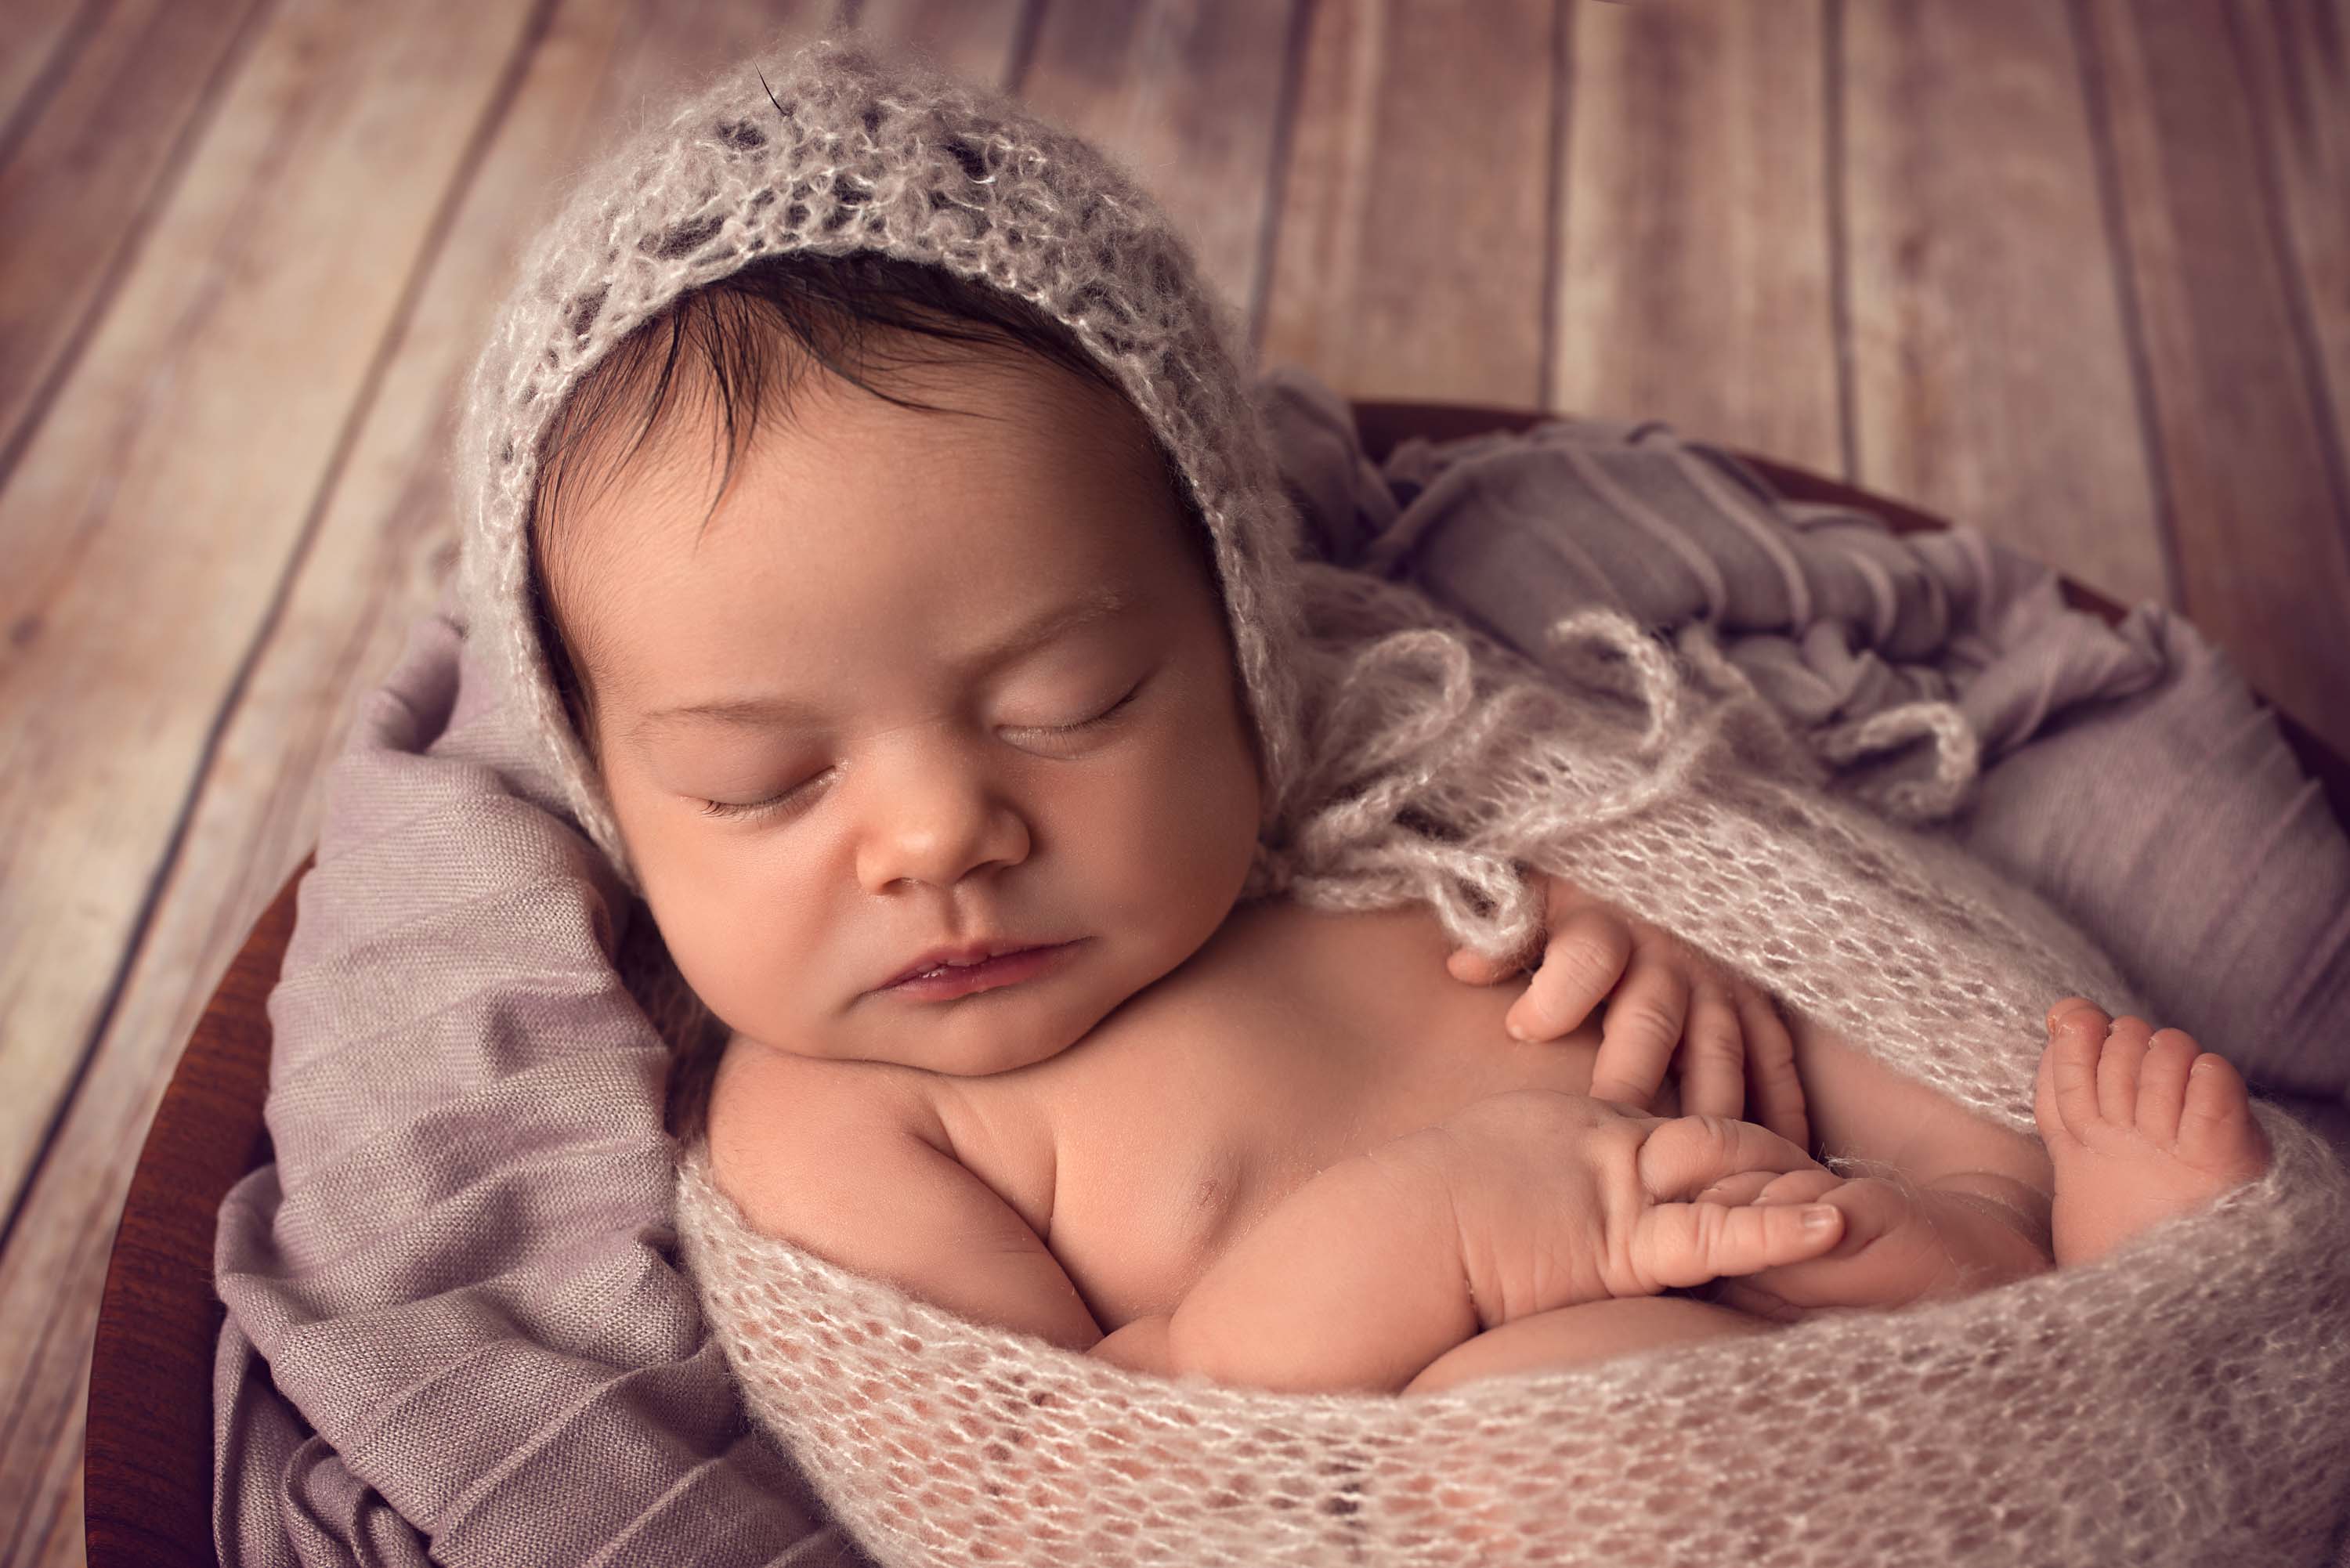 Baby asleep in a bowl on wooden floorboards for her baby photoshoot